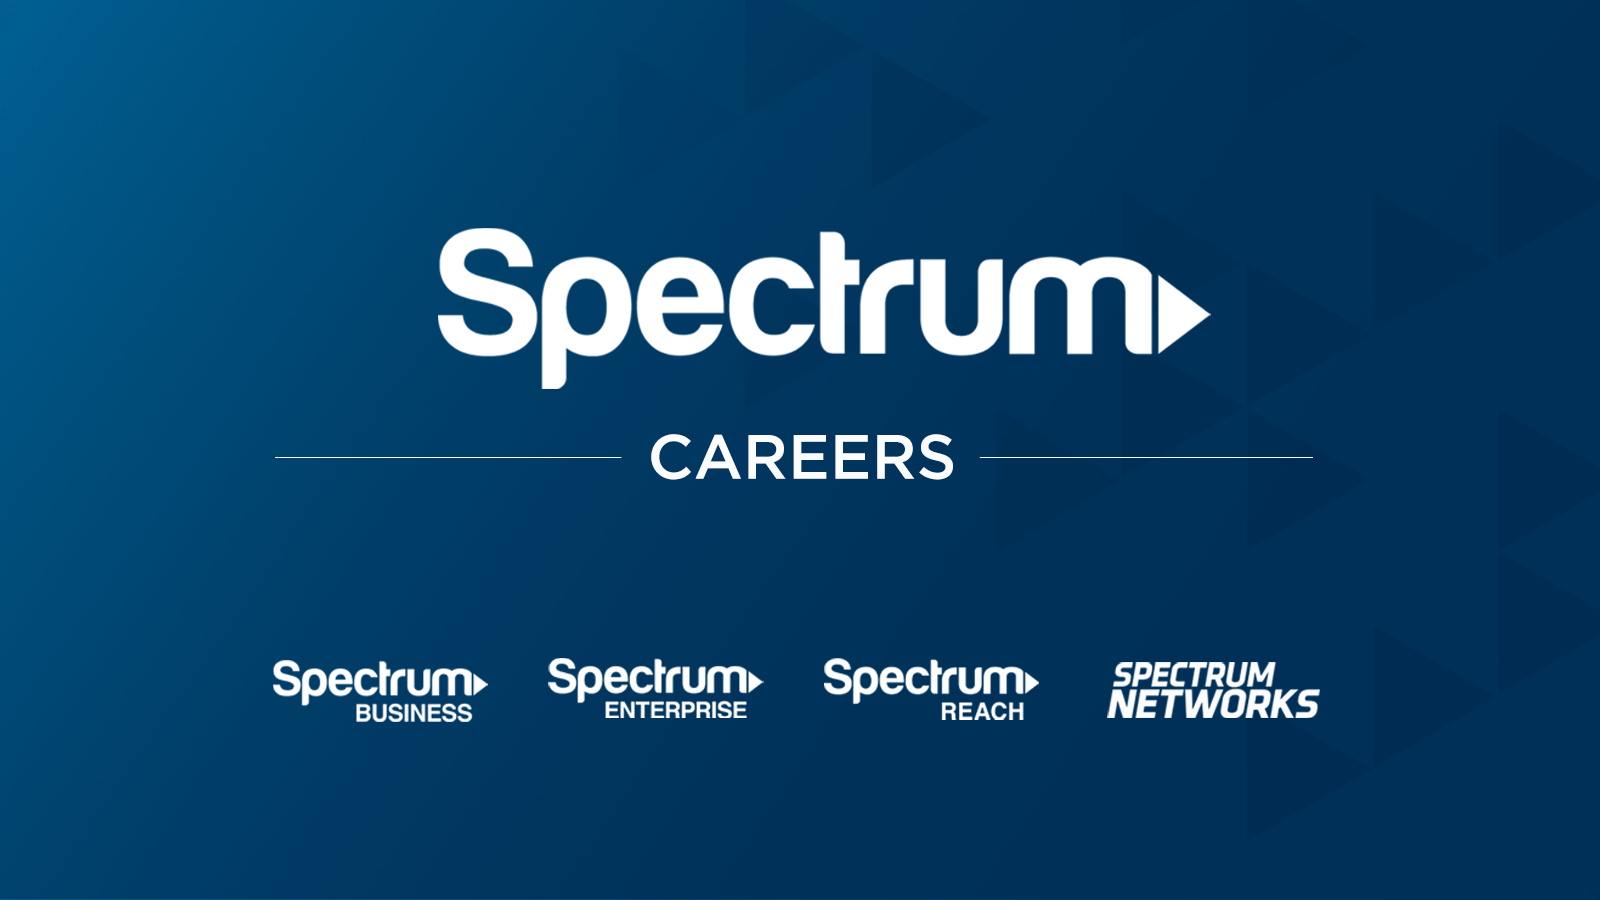 Benefits and compensation at Spectrum